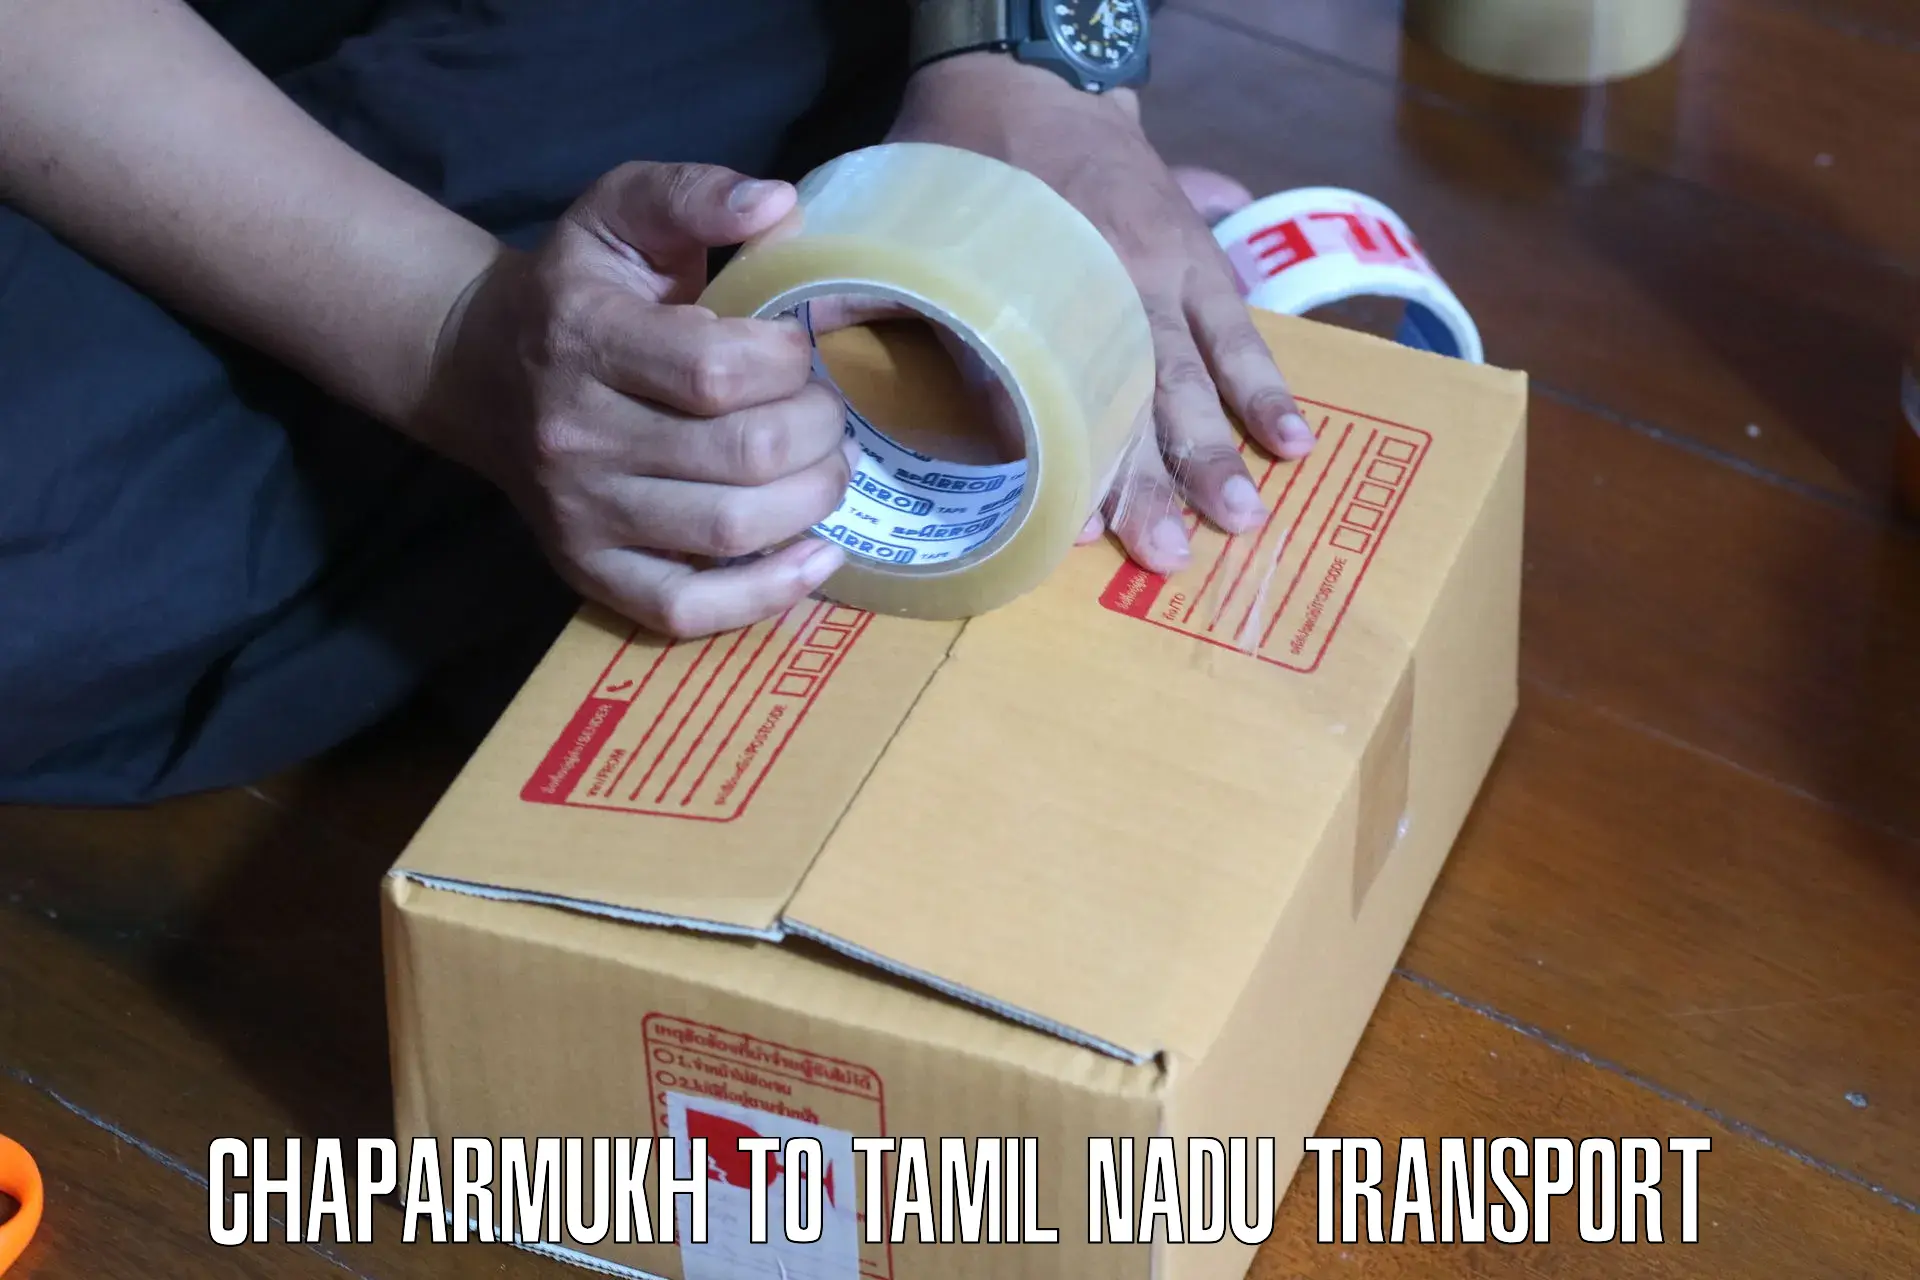 Air cargo transport services Chaparmukh to Namakkal